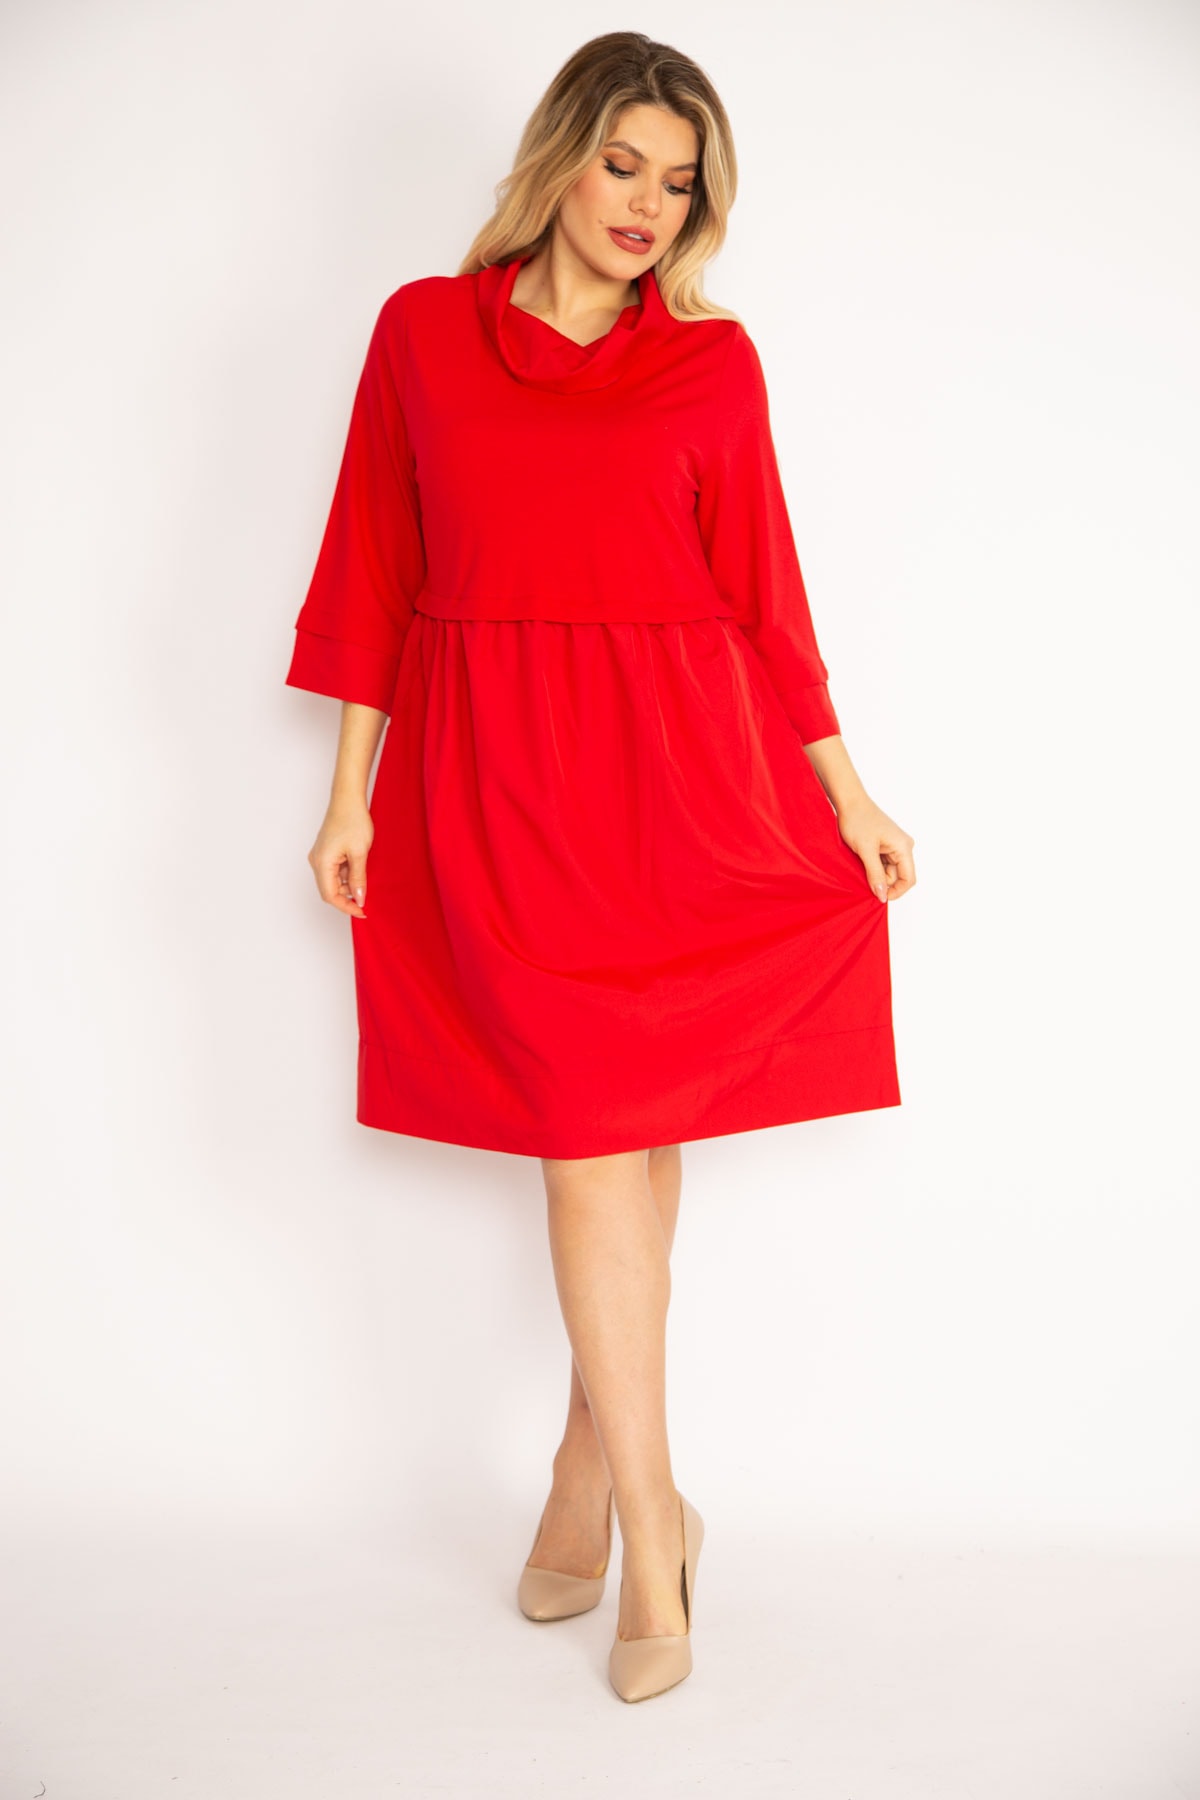 Levně Şans Women's Plus Size Red Stand-Up Collar Skirt Part Collar And Sleeves Rolled Up, Fabric Dress